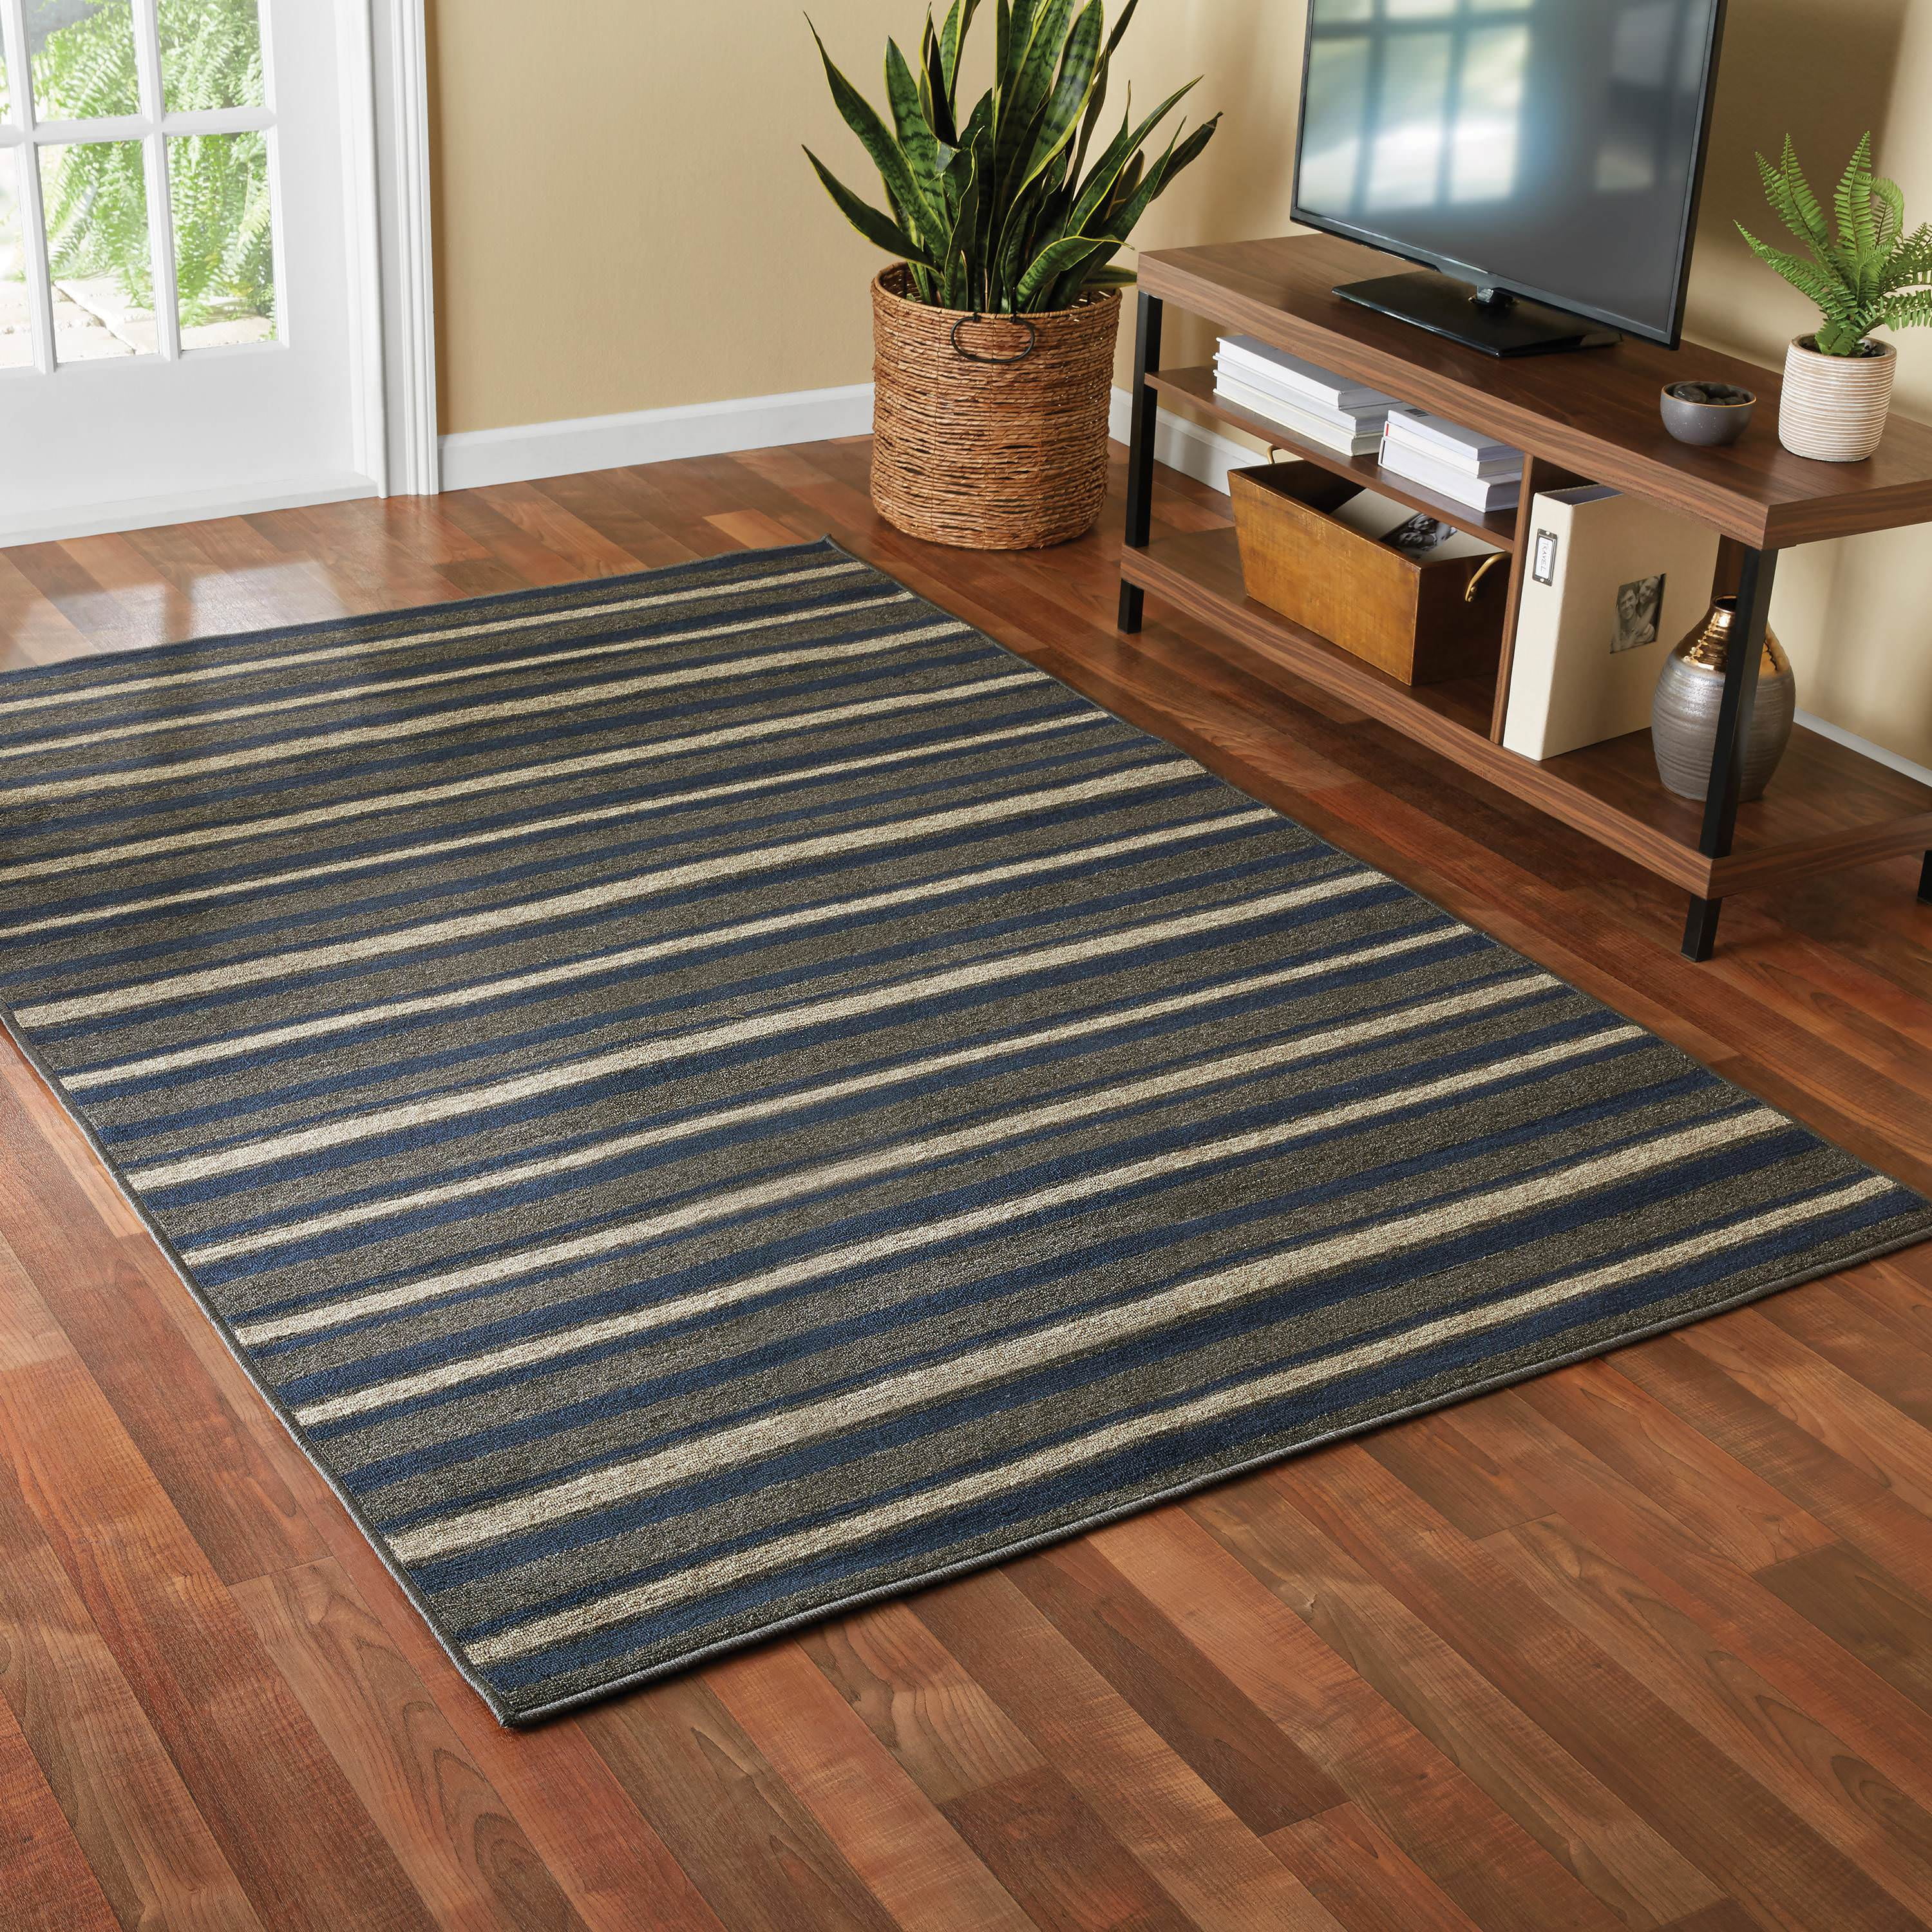 Mainstays Sonata Striped Indoor Living Room Area Rug, Navy Blue and Gray, 5' x 7'